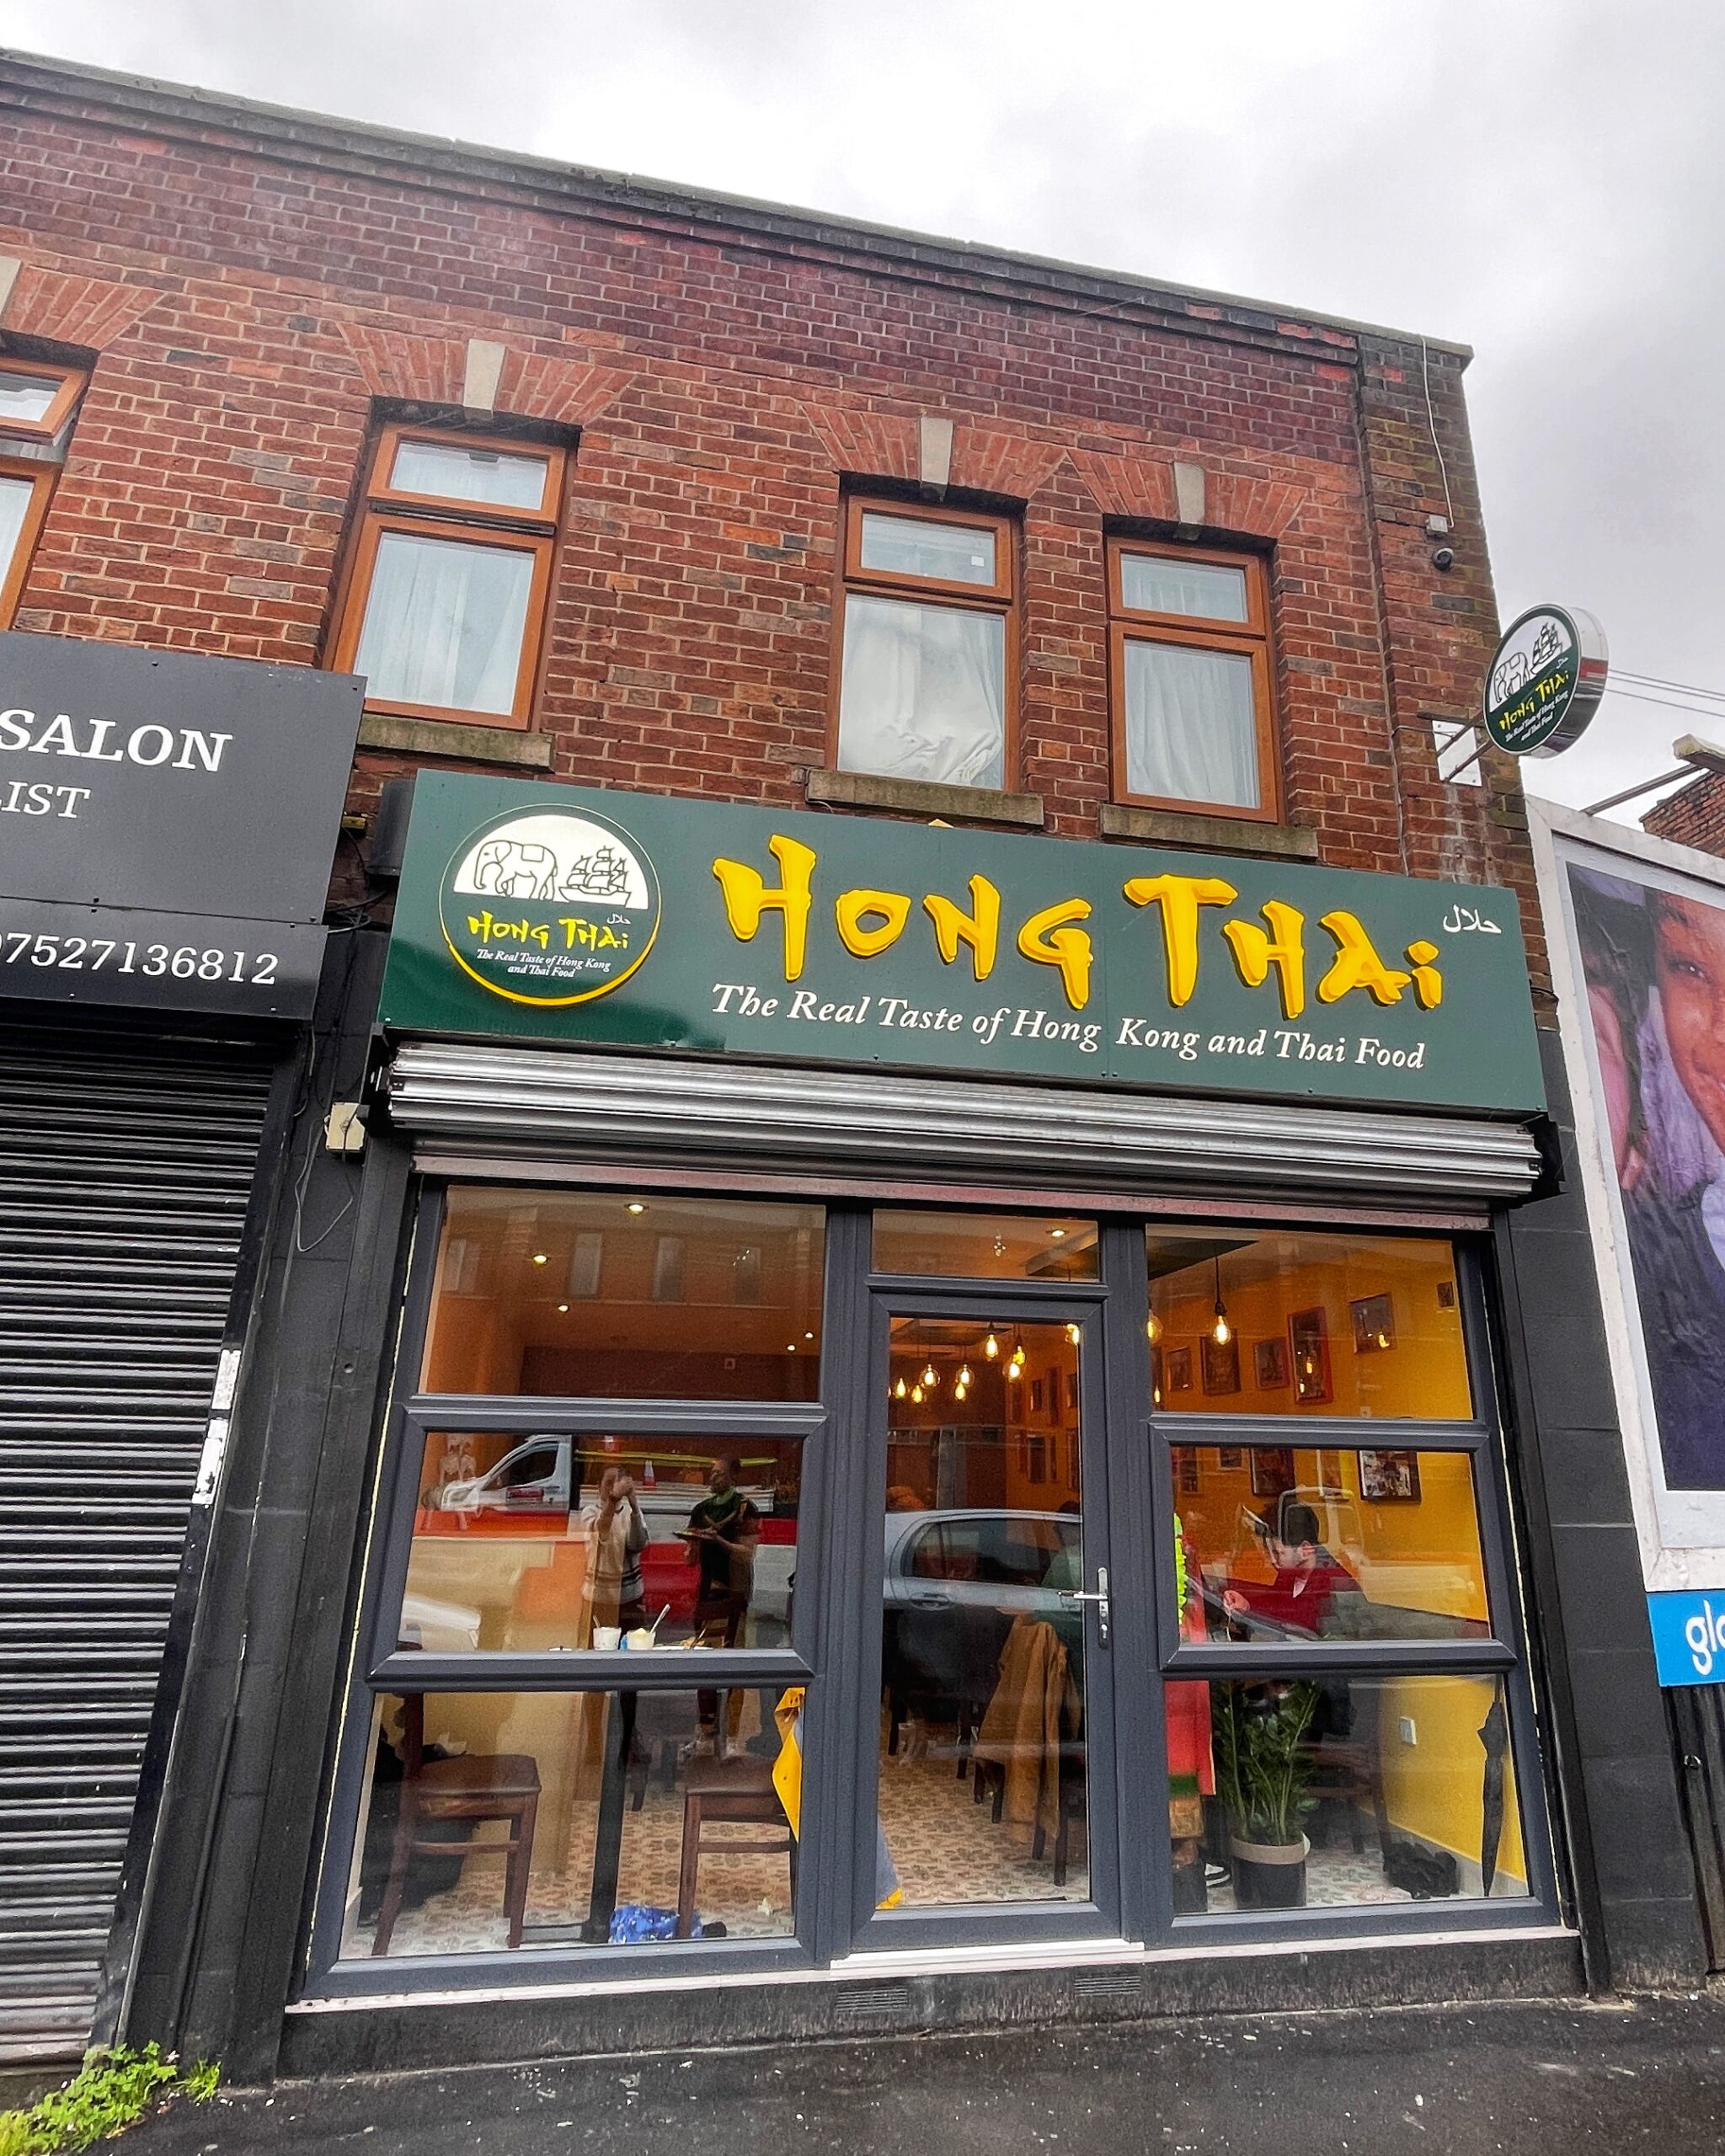 Hong Thai's new home in Manchester is on Oldham Road